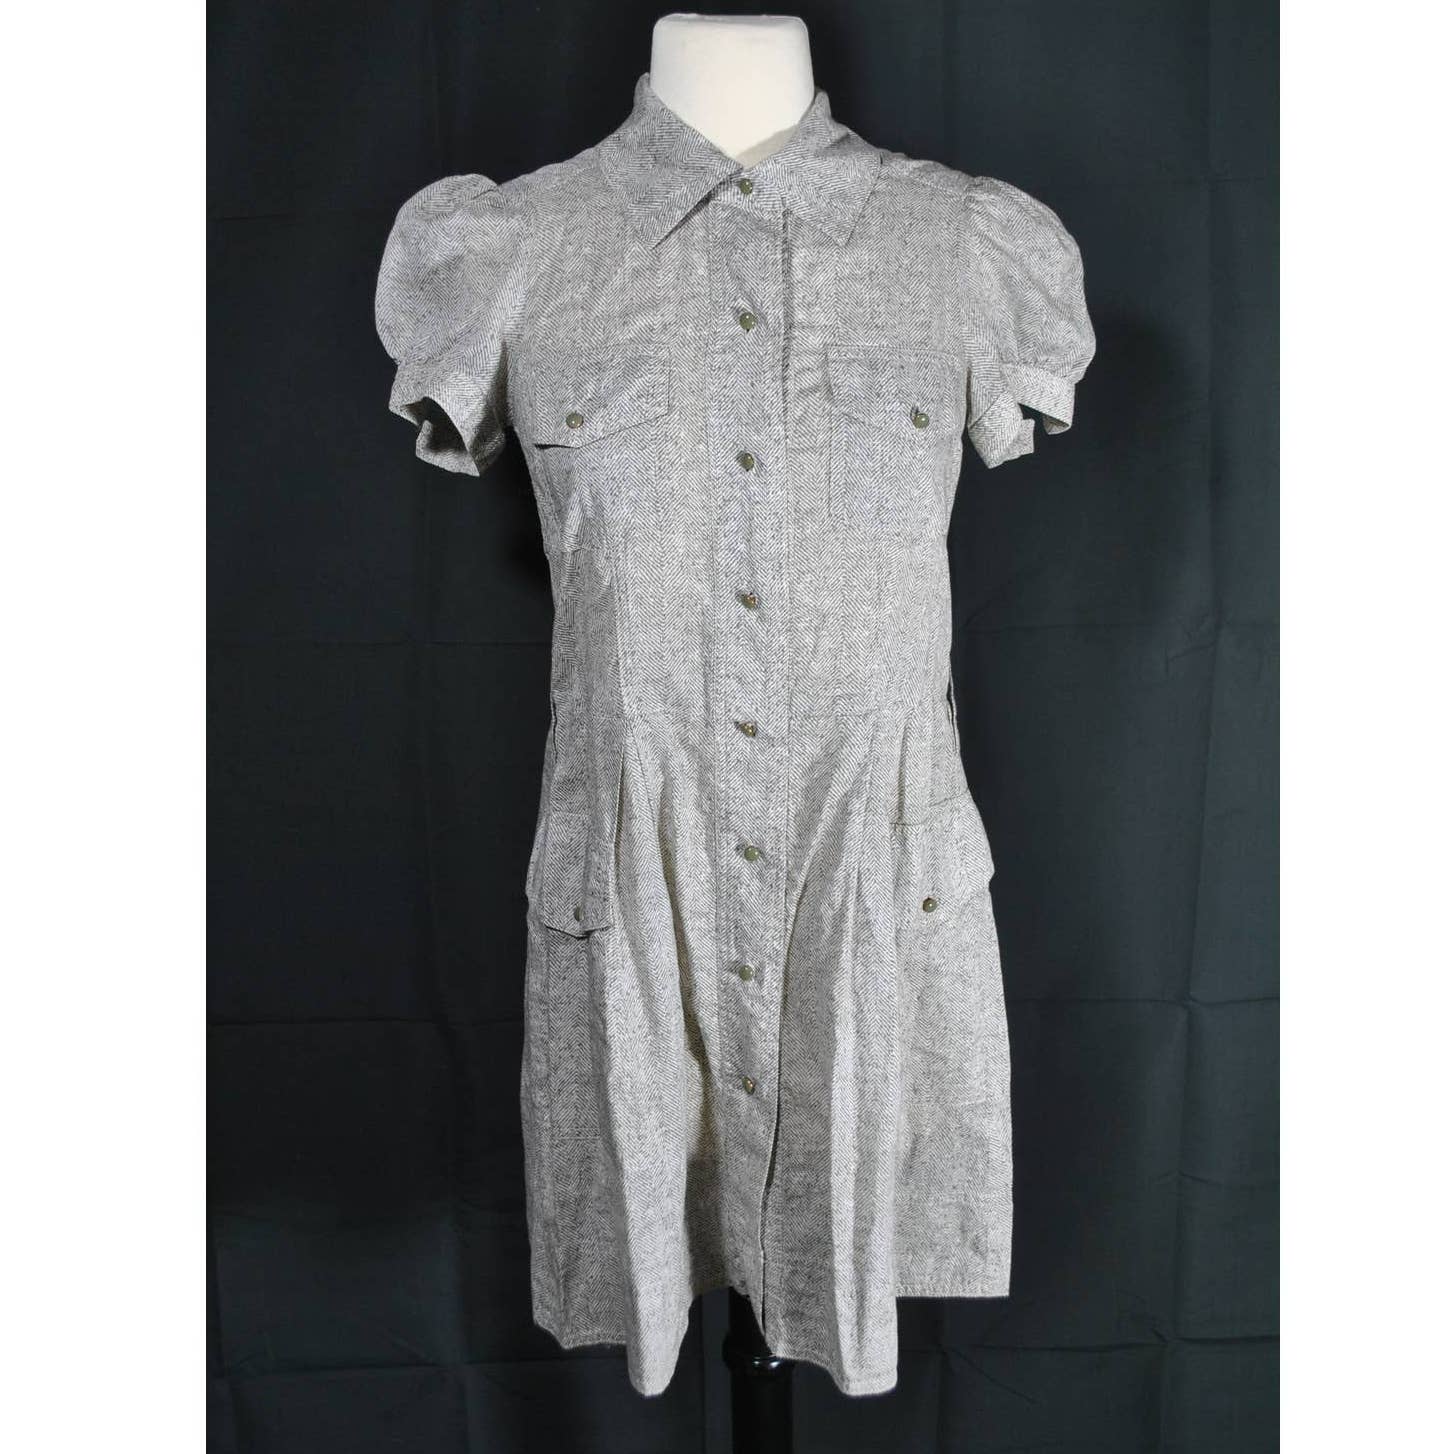 Marc by Marc Jacobs Heather Grey Button Up Cap Sleeve Dress - 2